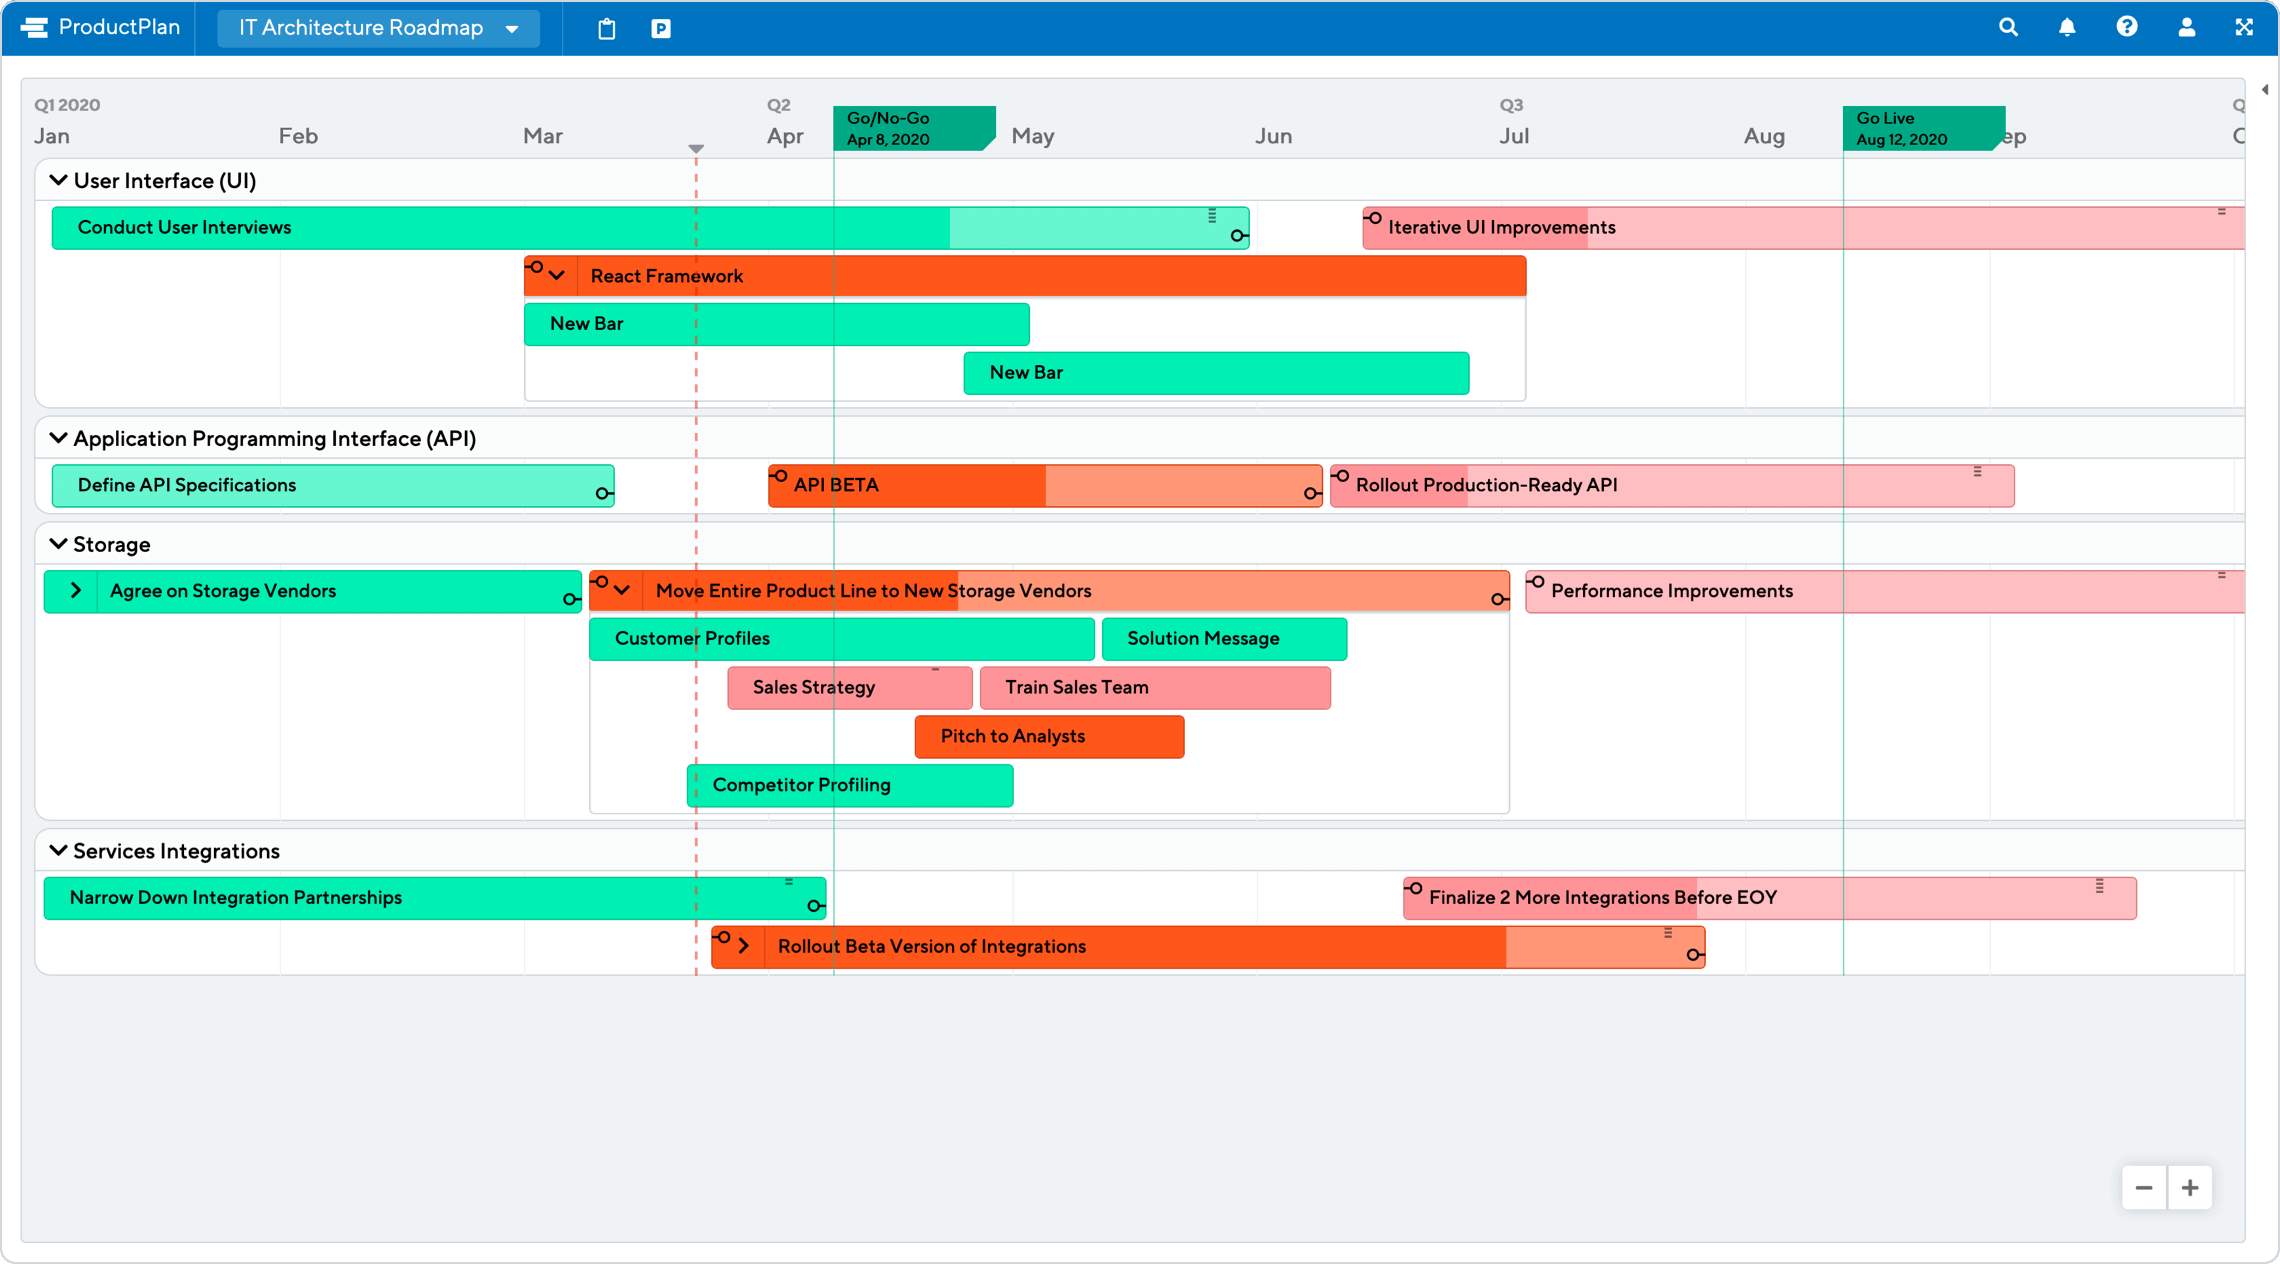 IT Architecture Roadmap Template by ProductPlan